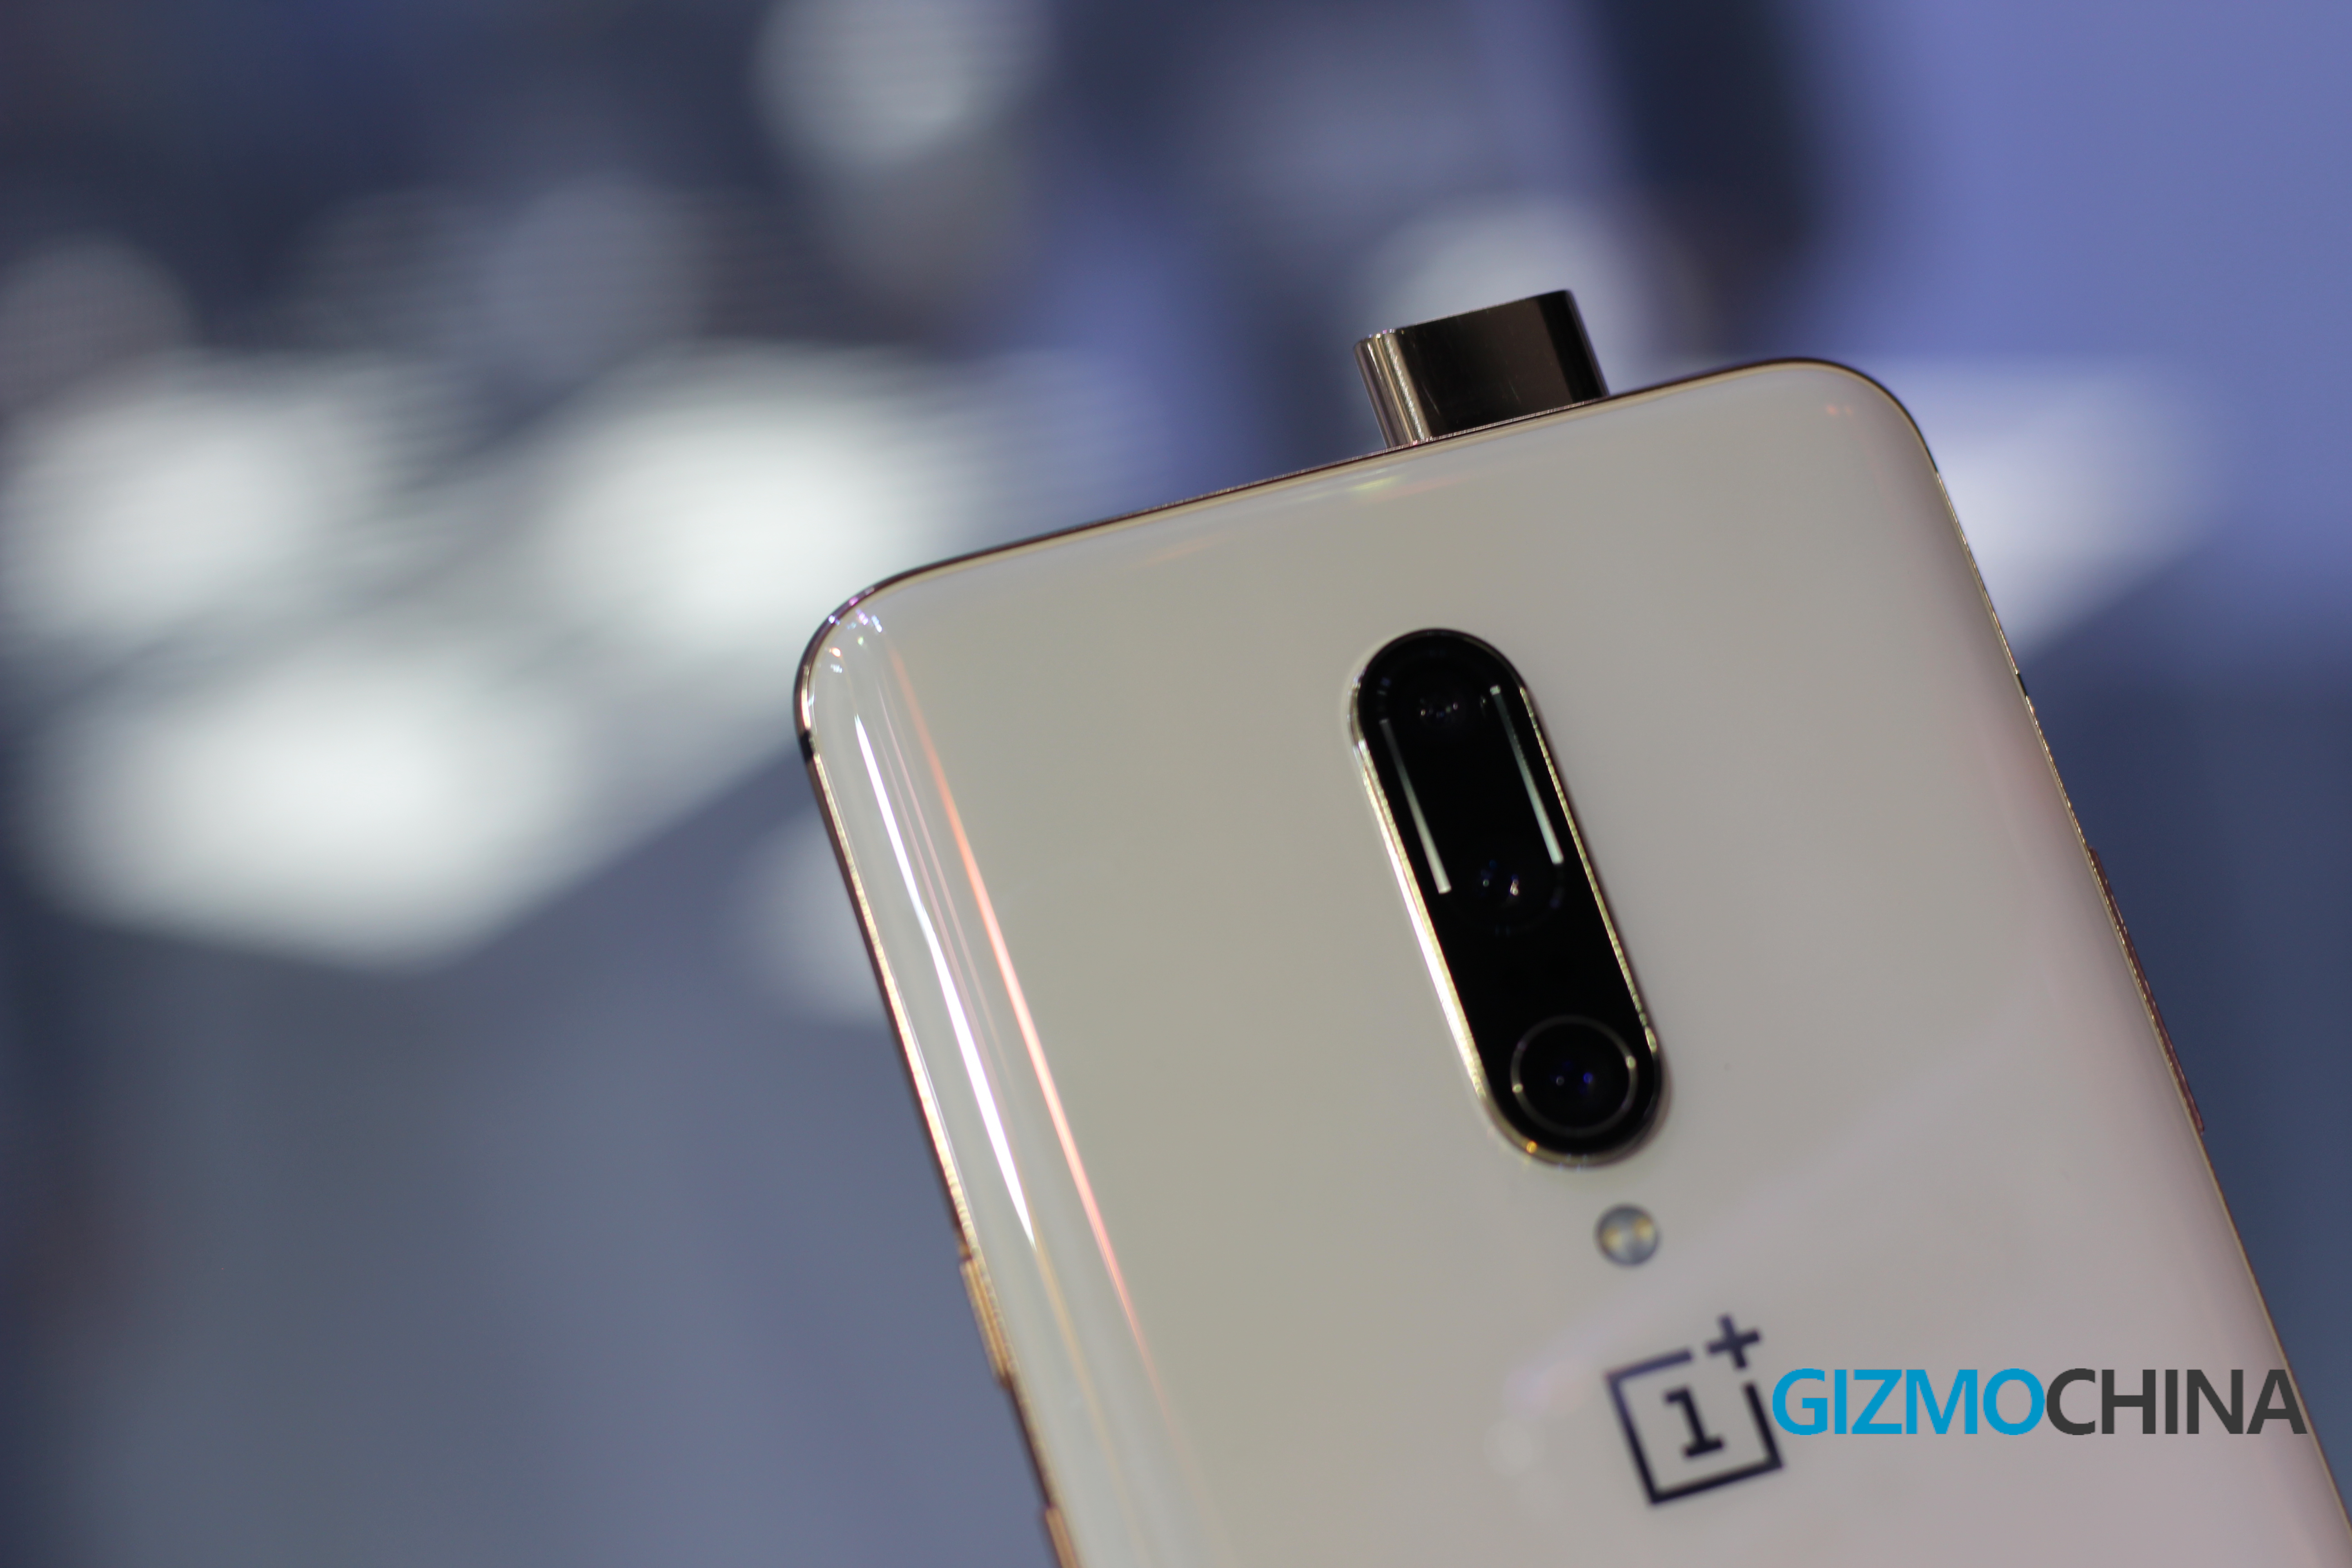 Oneplus 7 And Oneplus 7 Pro Launched In China Pricing Starts At 2 999 Yuan 436 Gizmochina